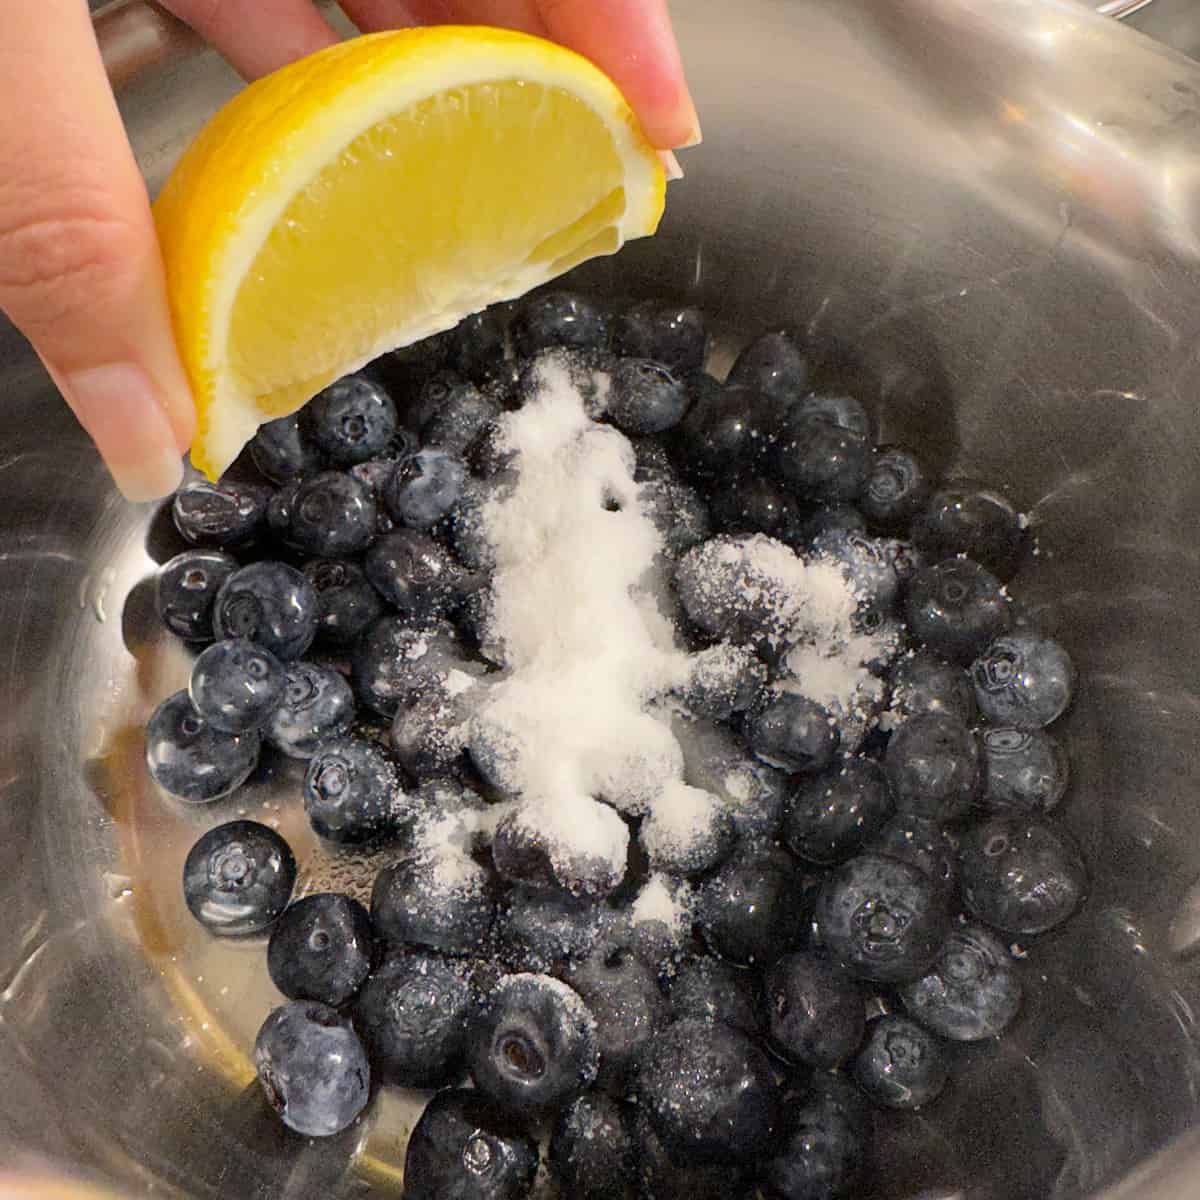 blueberries in a pot with sugar, salt, and a lemon being squeezed over top